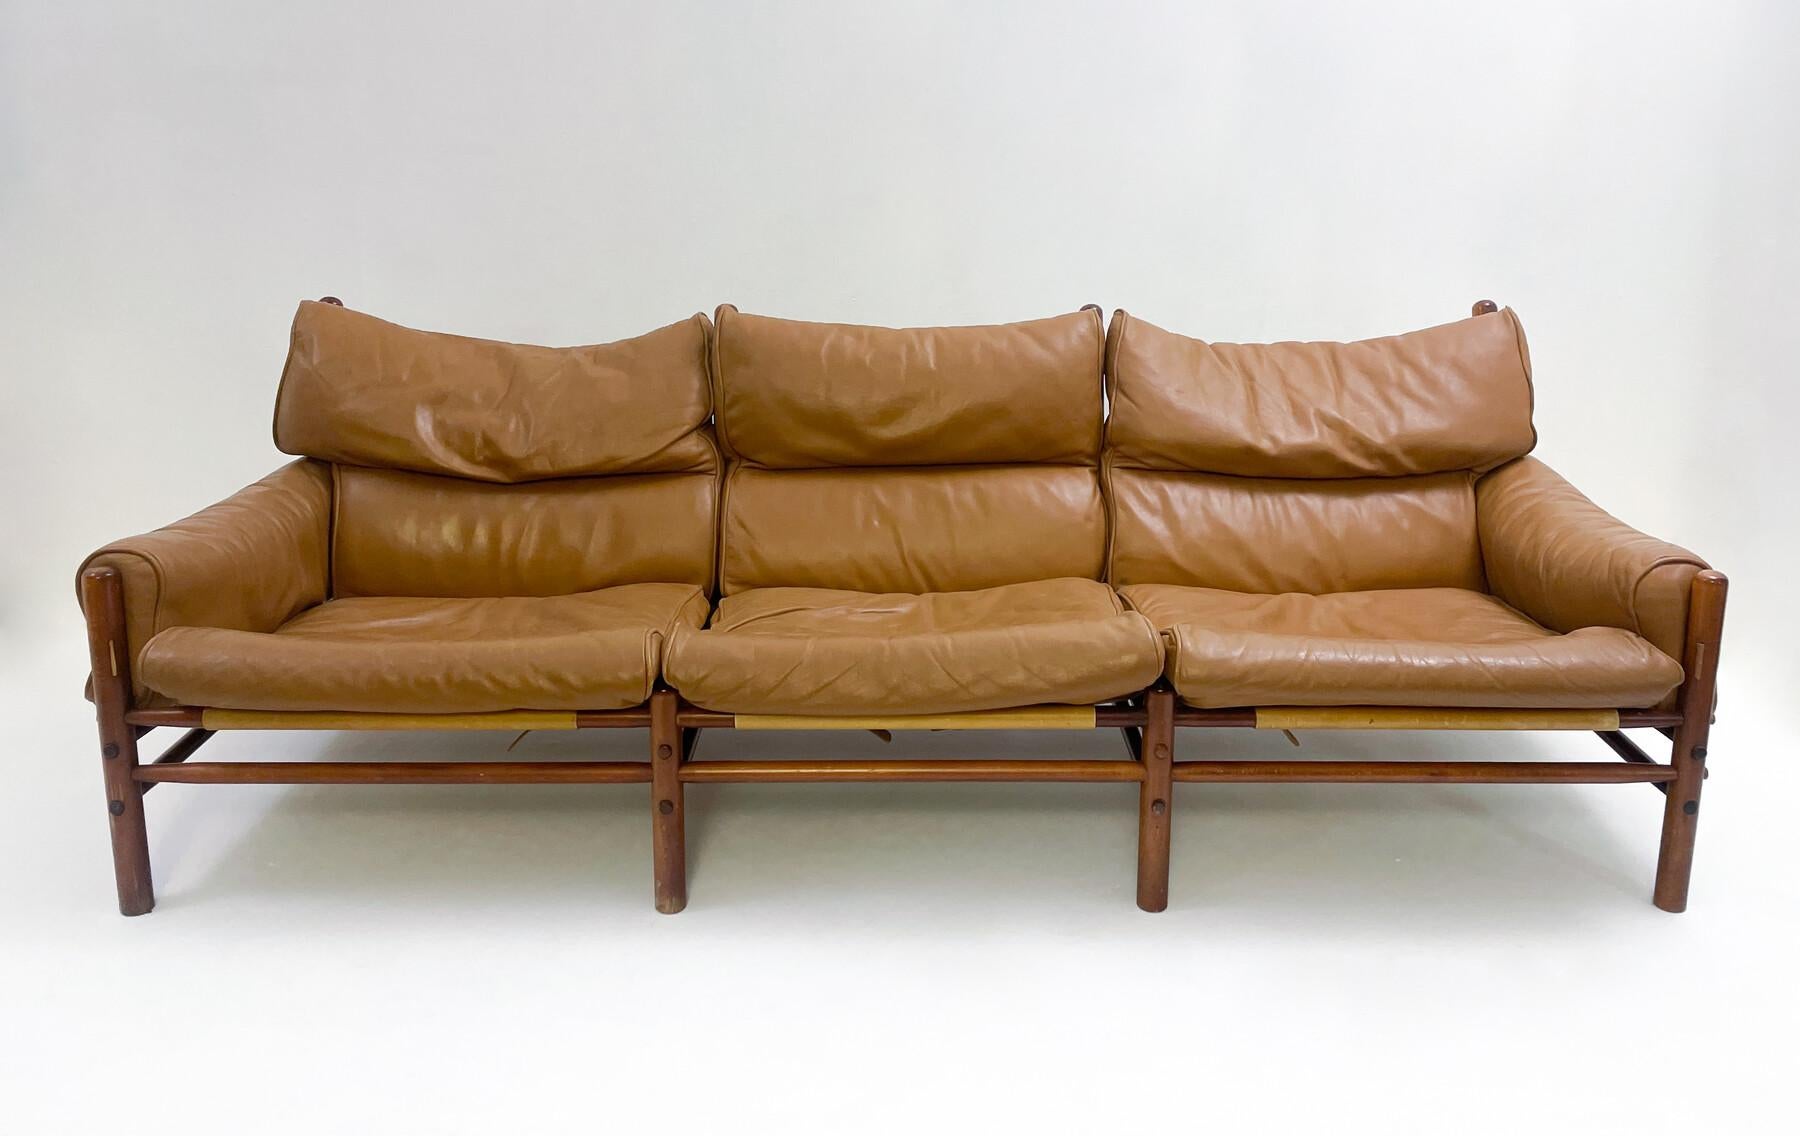 Mid-Century Modern Kontiki Three-Seater Sofa by Arne Norell, Sweden, 1960s For Sale 1